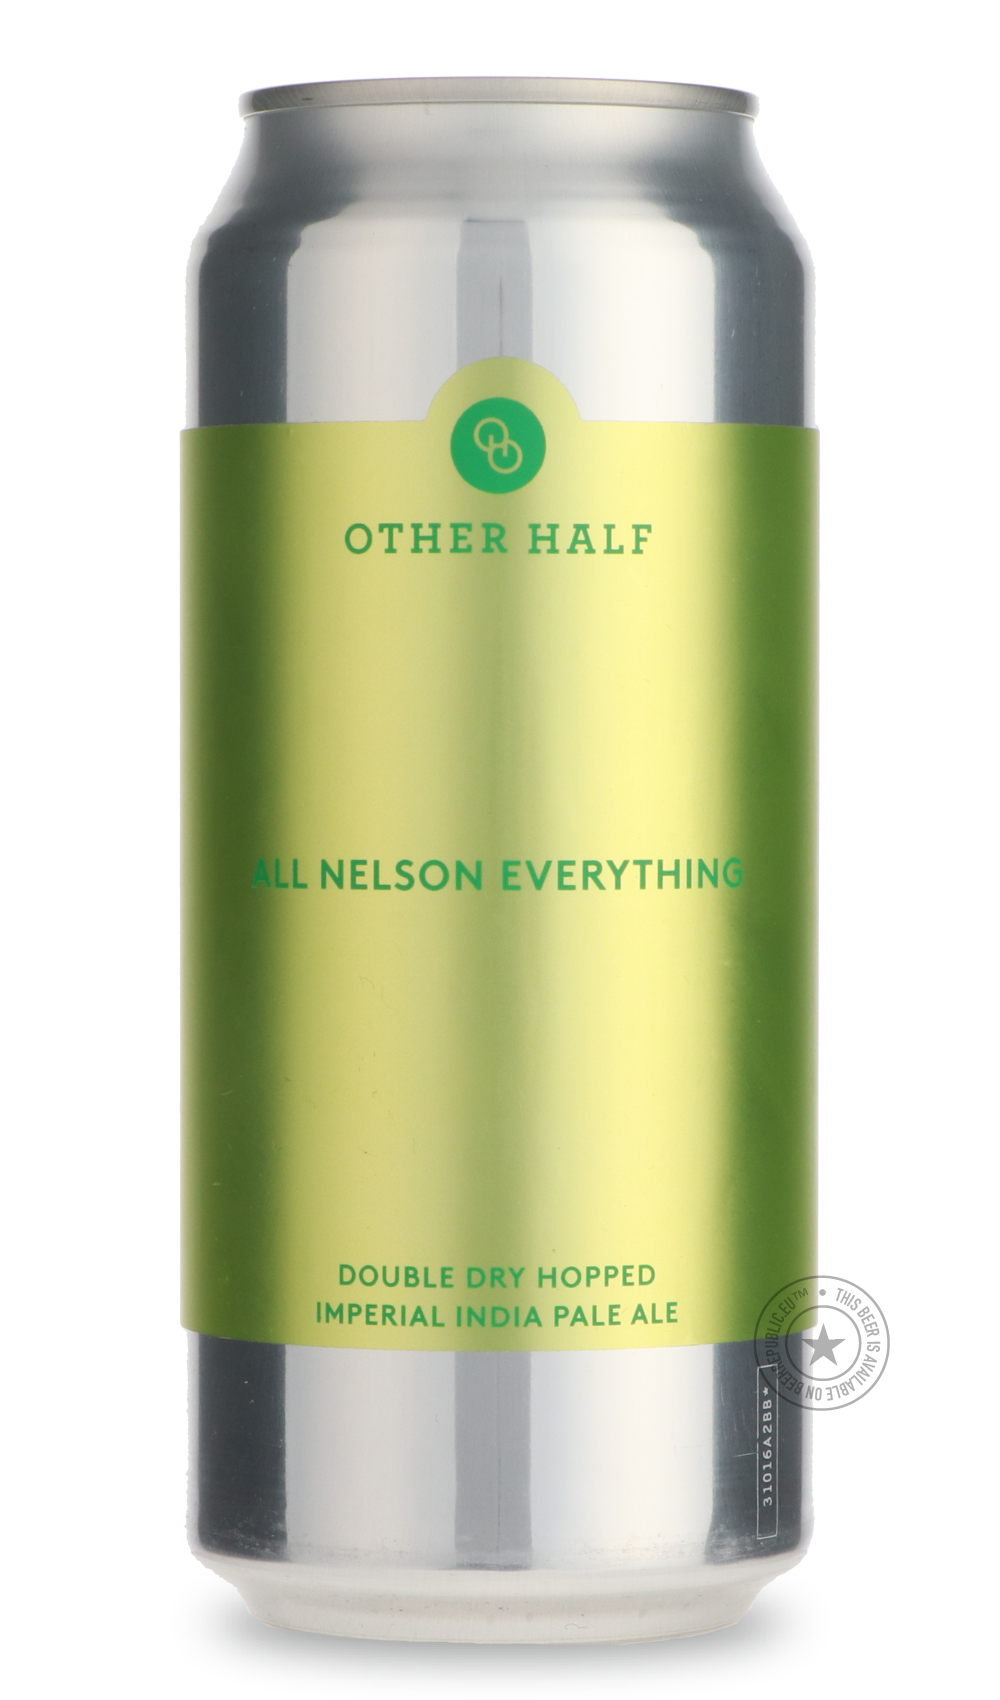 -Other Half- All Nelson Everything-IPA- Only @ Beer Republic - The best online beer store for American & Canadian craft beer - Buy beer online from the USA and Canada - Bier online kopen - Amerikaans bier kopen - Craft beer store - Craft beer kopen - Amerikanisch bier kaufen - Bier online kaufen - Acheter biere online - IPA - Stout - Porter - New England IPA - Hazy IPA - Imperial Stout - Barrel Aged - Barrel Aged Imperial Stout - Brown - Dark beer - Blond - Blonde - Pilsner - Lager - Wheat - Weizen - Amber 